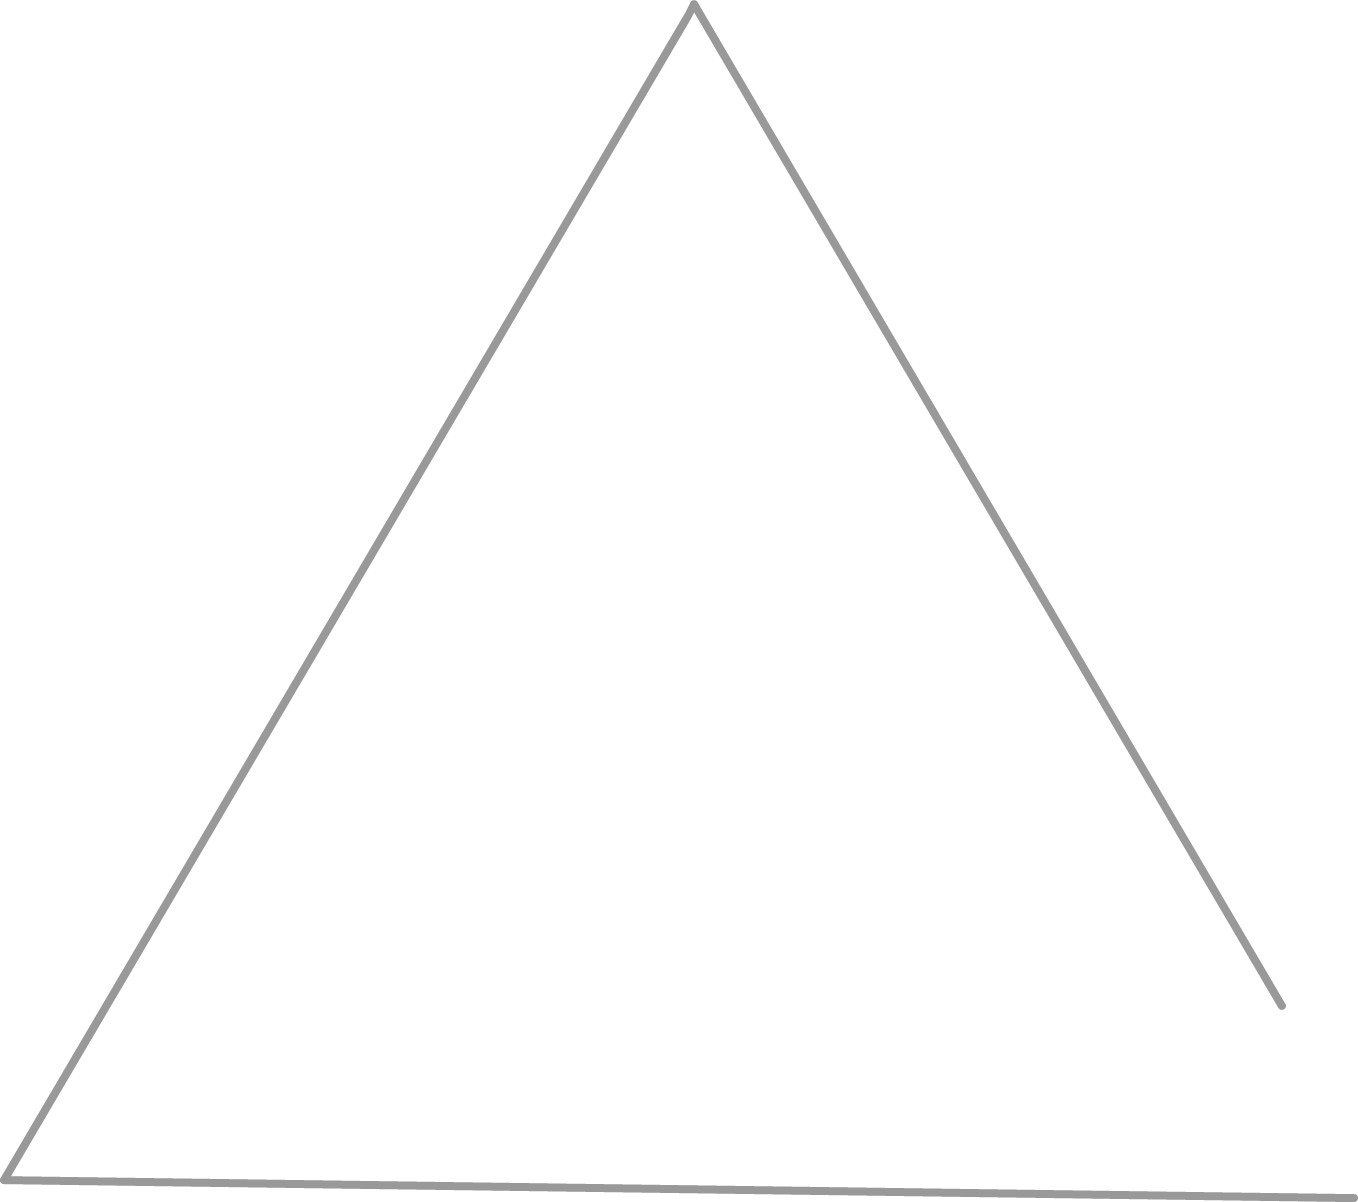 Triangle Free Download PNG Image